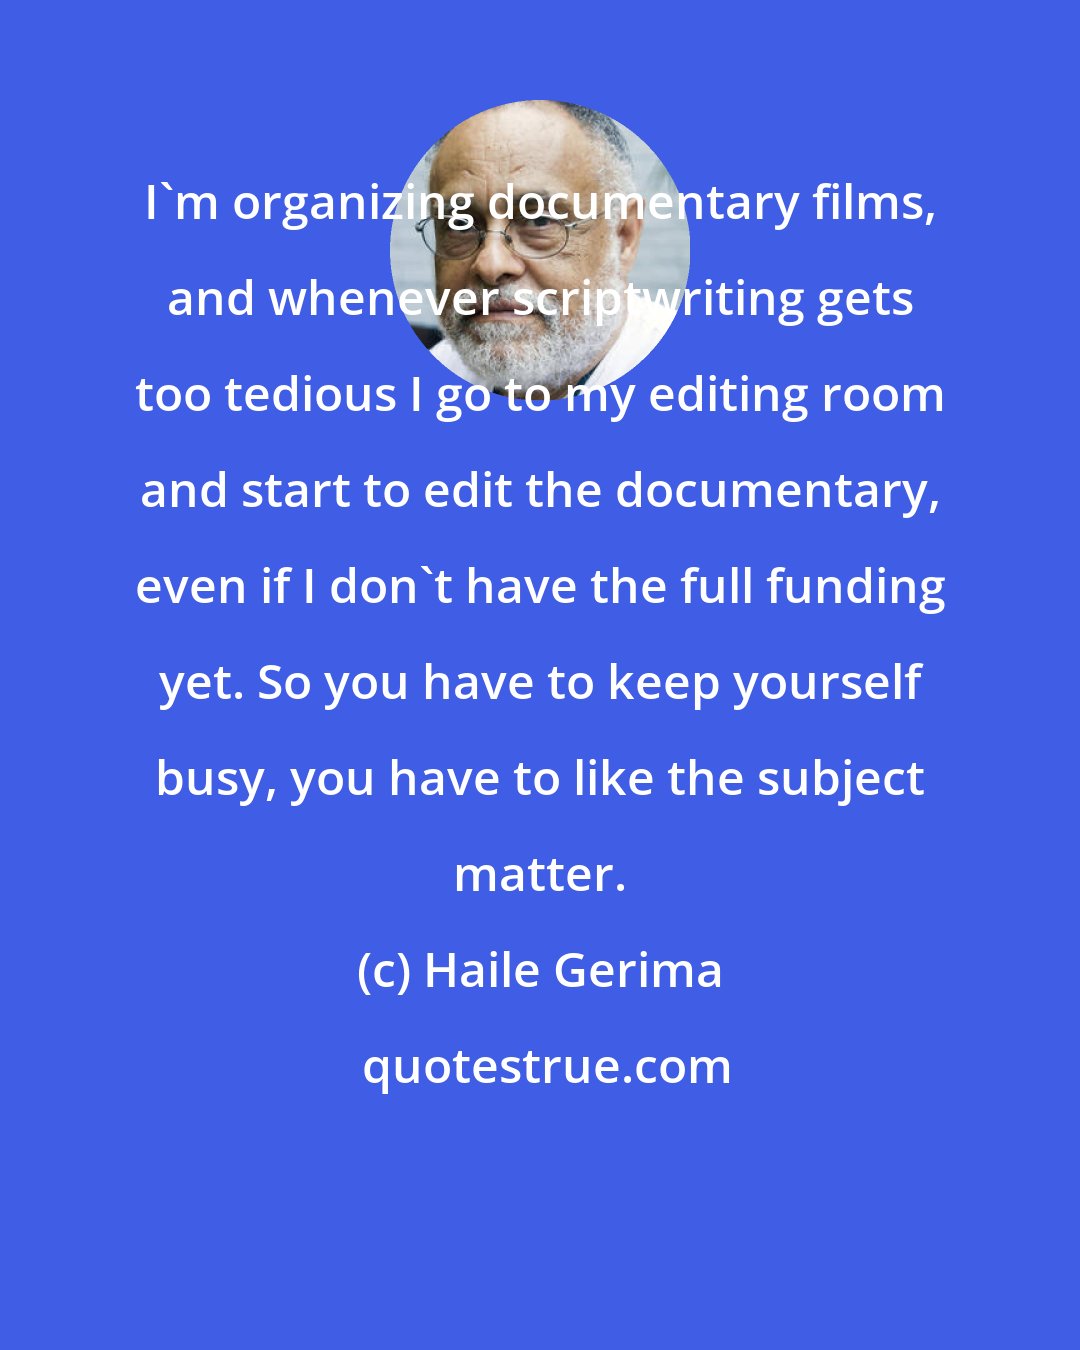 Haile Gerima: I'm organizing documentary films, and whenever scriptwriting gets too tedious I go to my editing room and start to edit the documentary, even if I don't have the full funding yet. So you have to keep yourself busy, you have to like the subject matter.